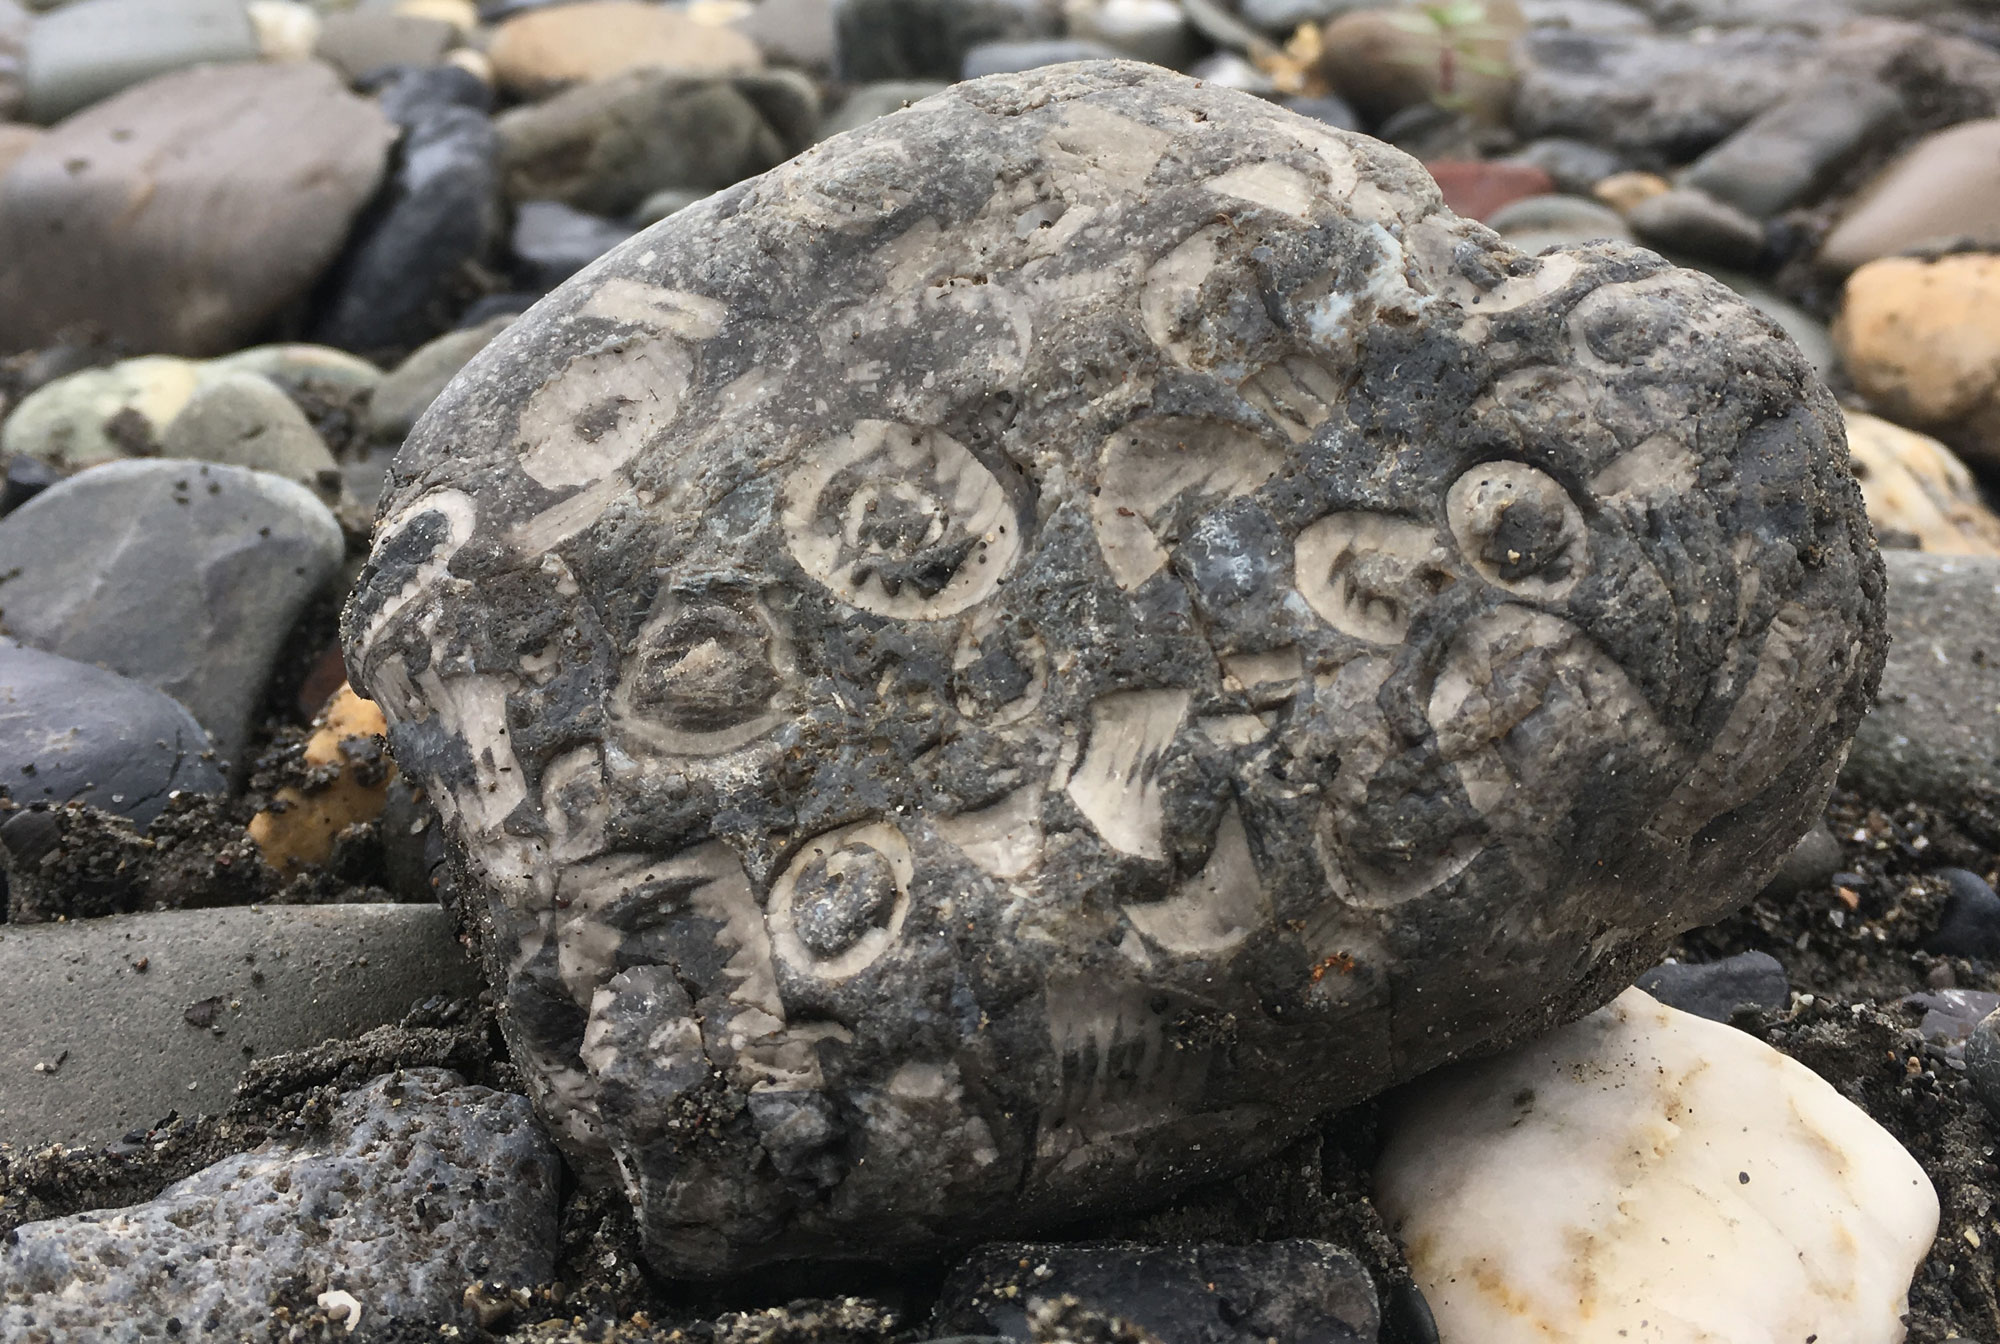 Photograph of gray stone on a riverbank with eroded crinoid segments embedded in it. The crinoid pieces are off-white and contrast with the background color of the stone.